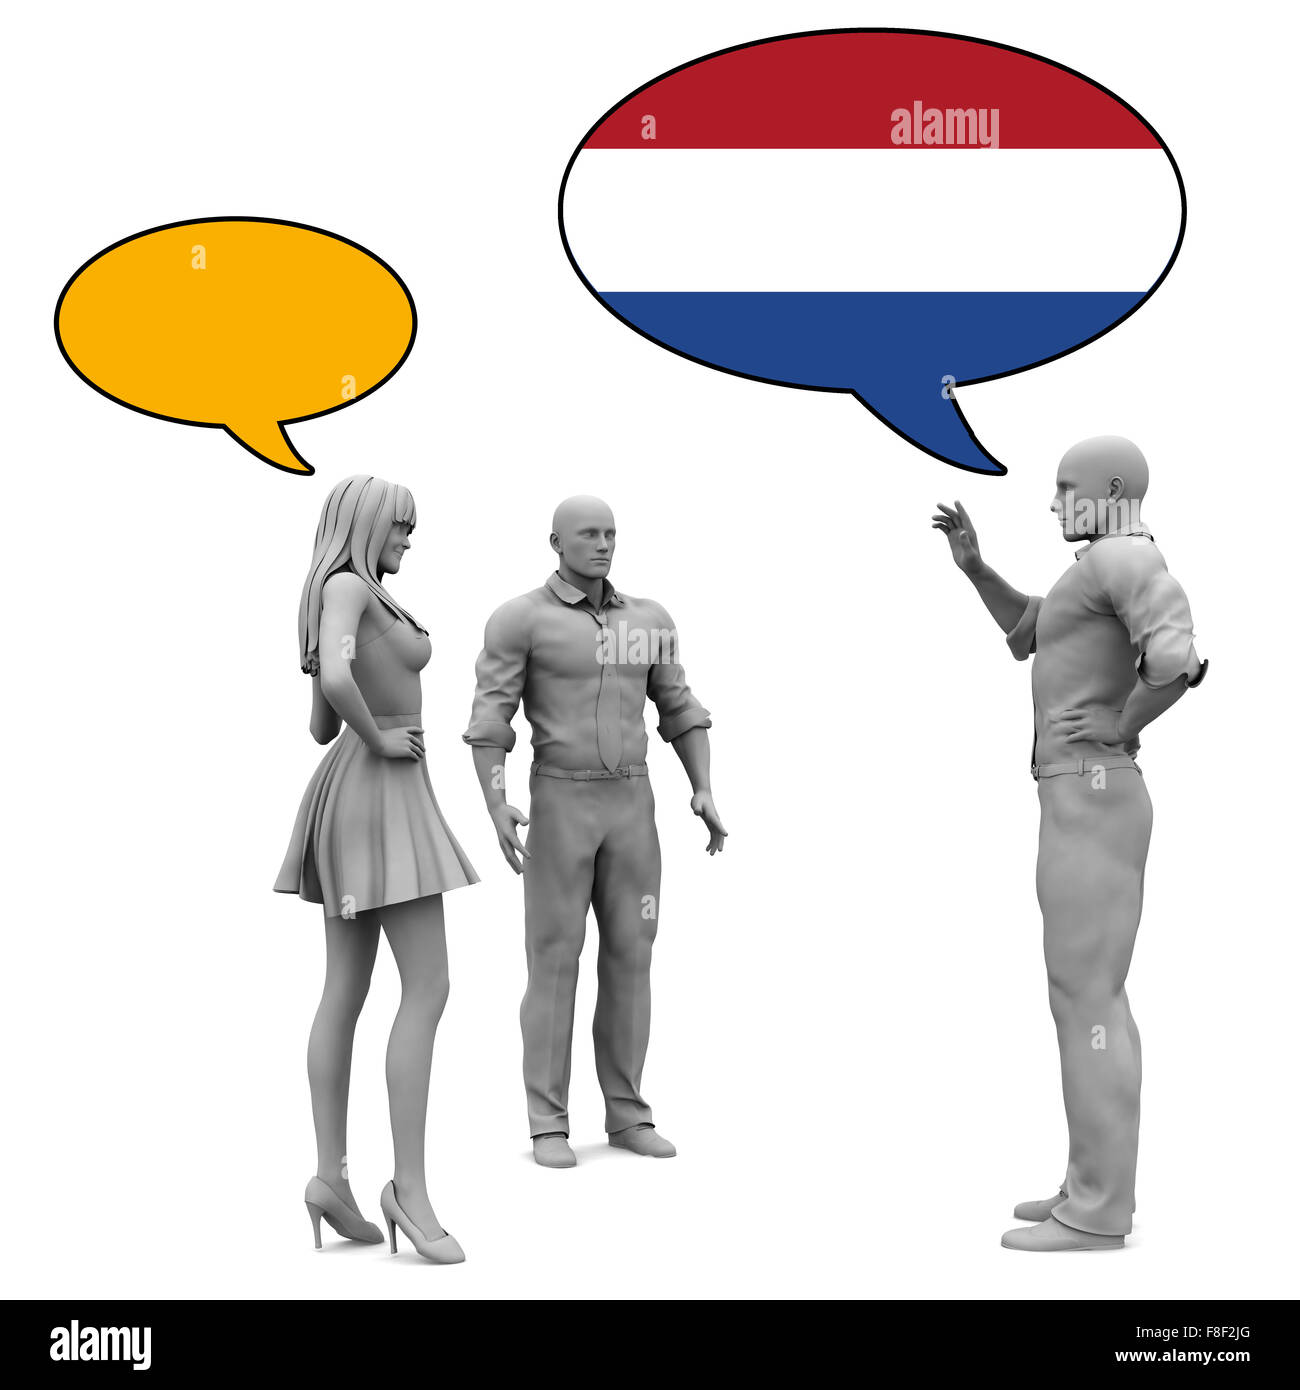 Learn Dutch Culture and Language to Communicate Stock Photo